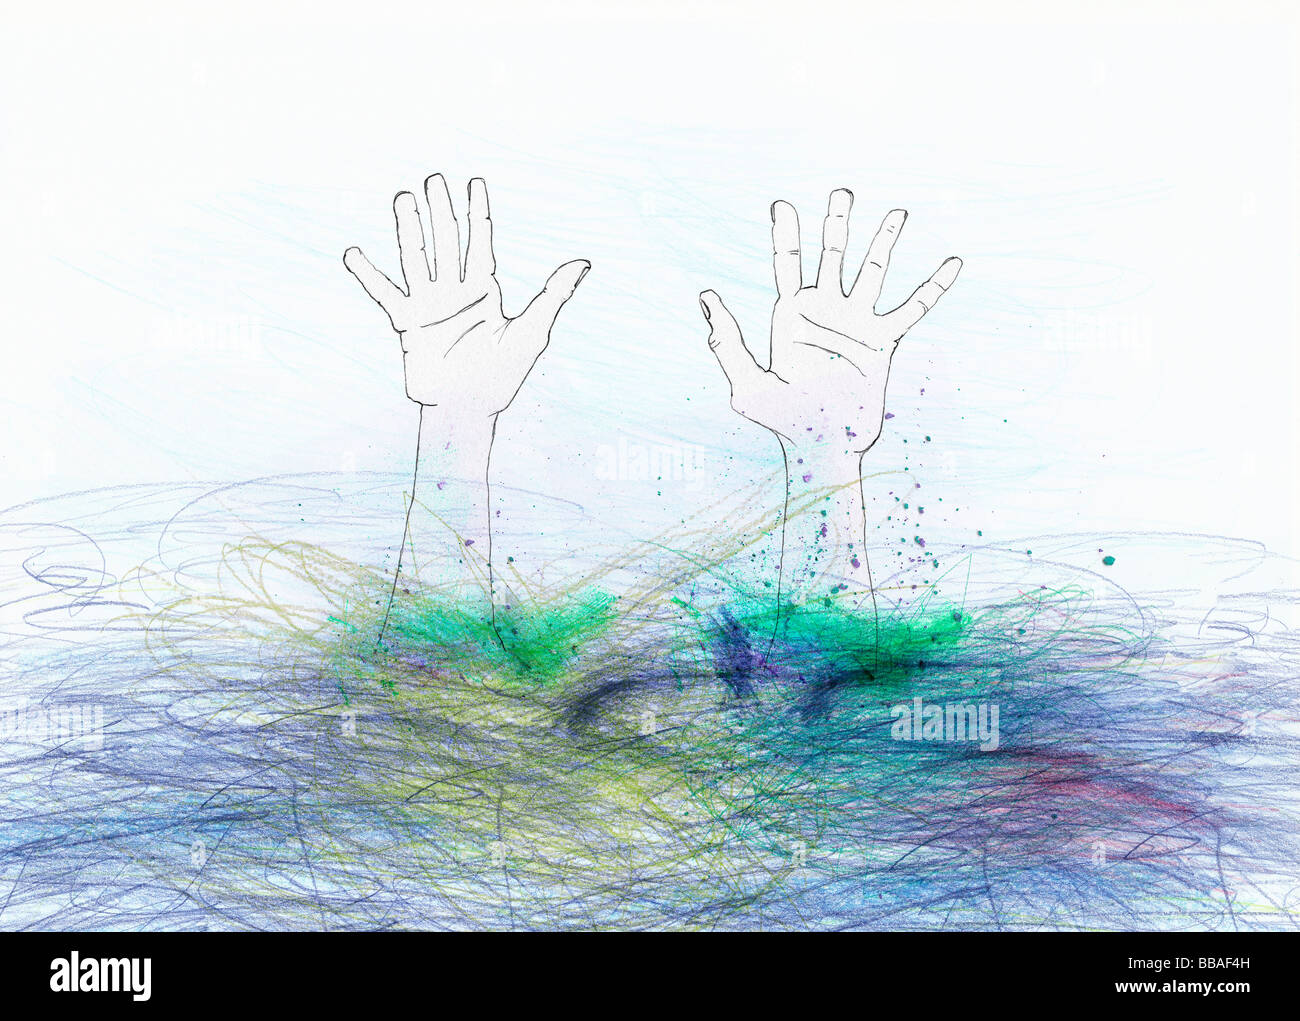 Hand reaching up underwater hires stock photography and images Alamy